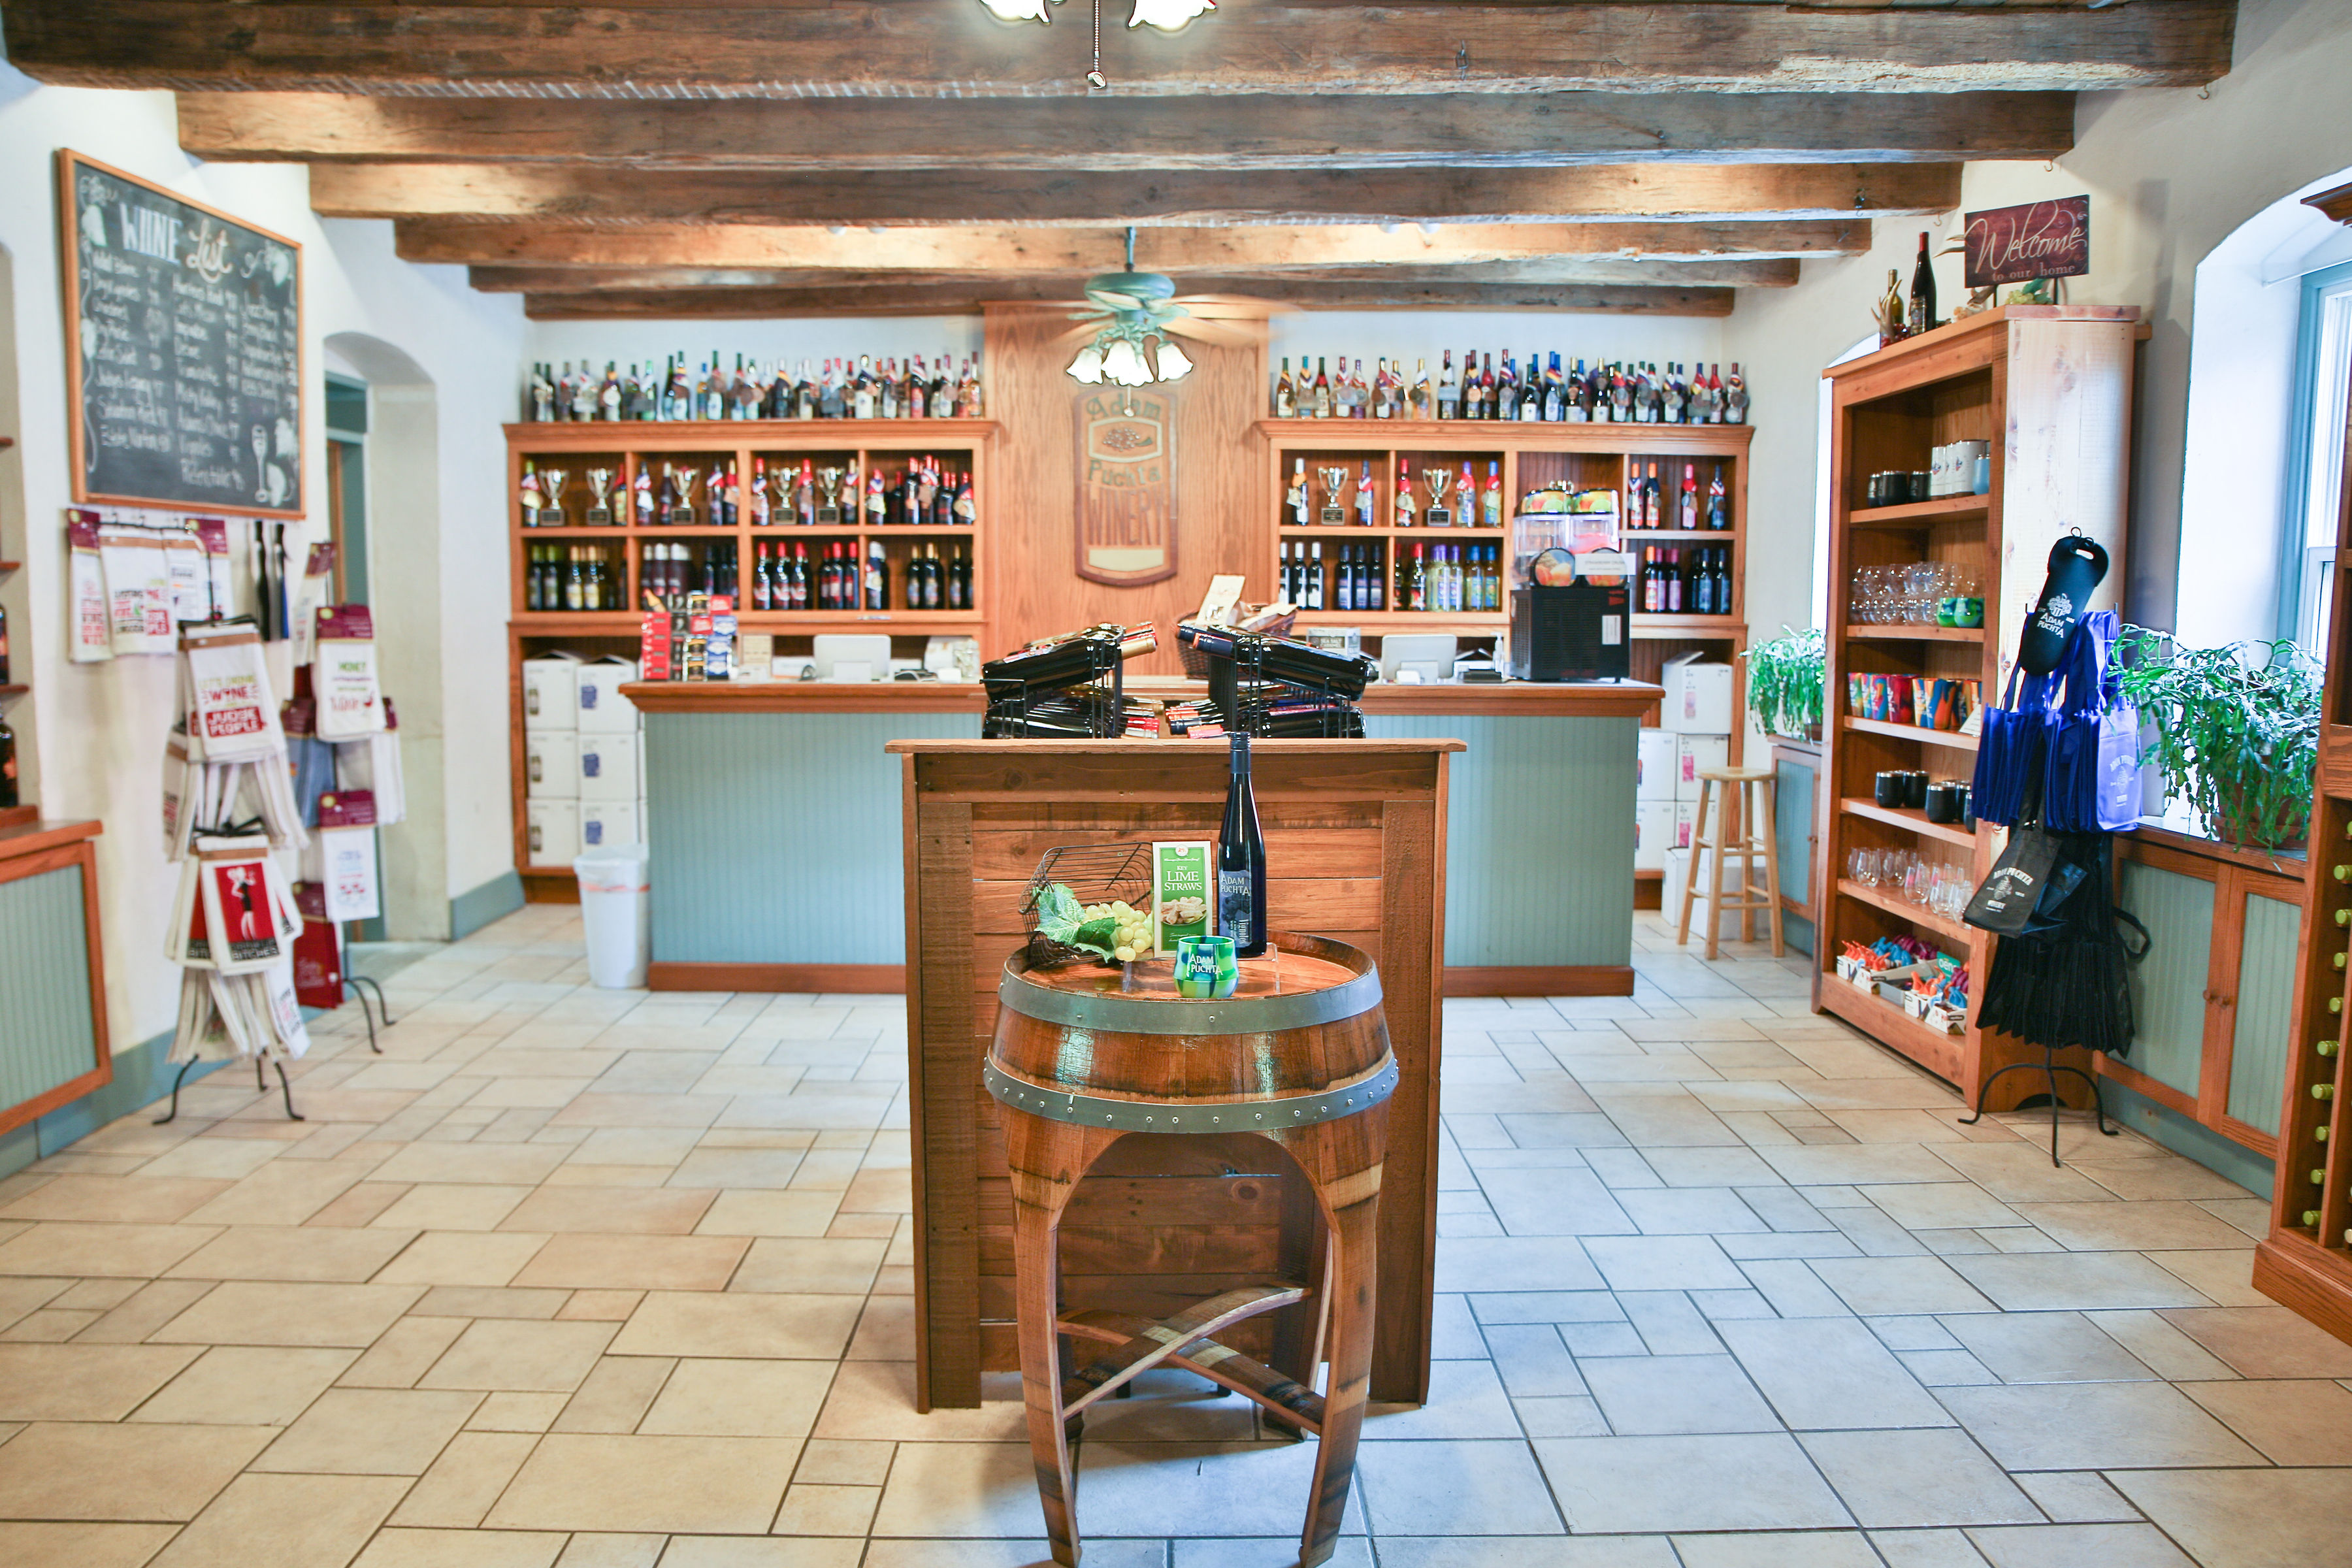 Adam Puchta Winery- A gift shop with a wall of wine on the back wall.